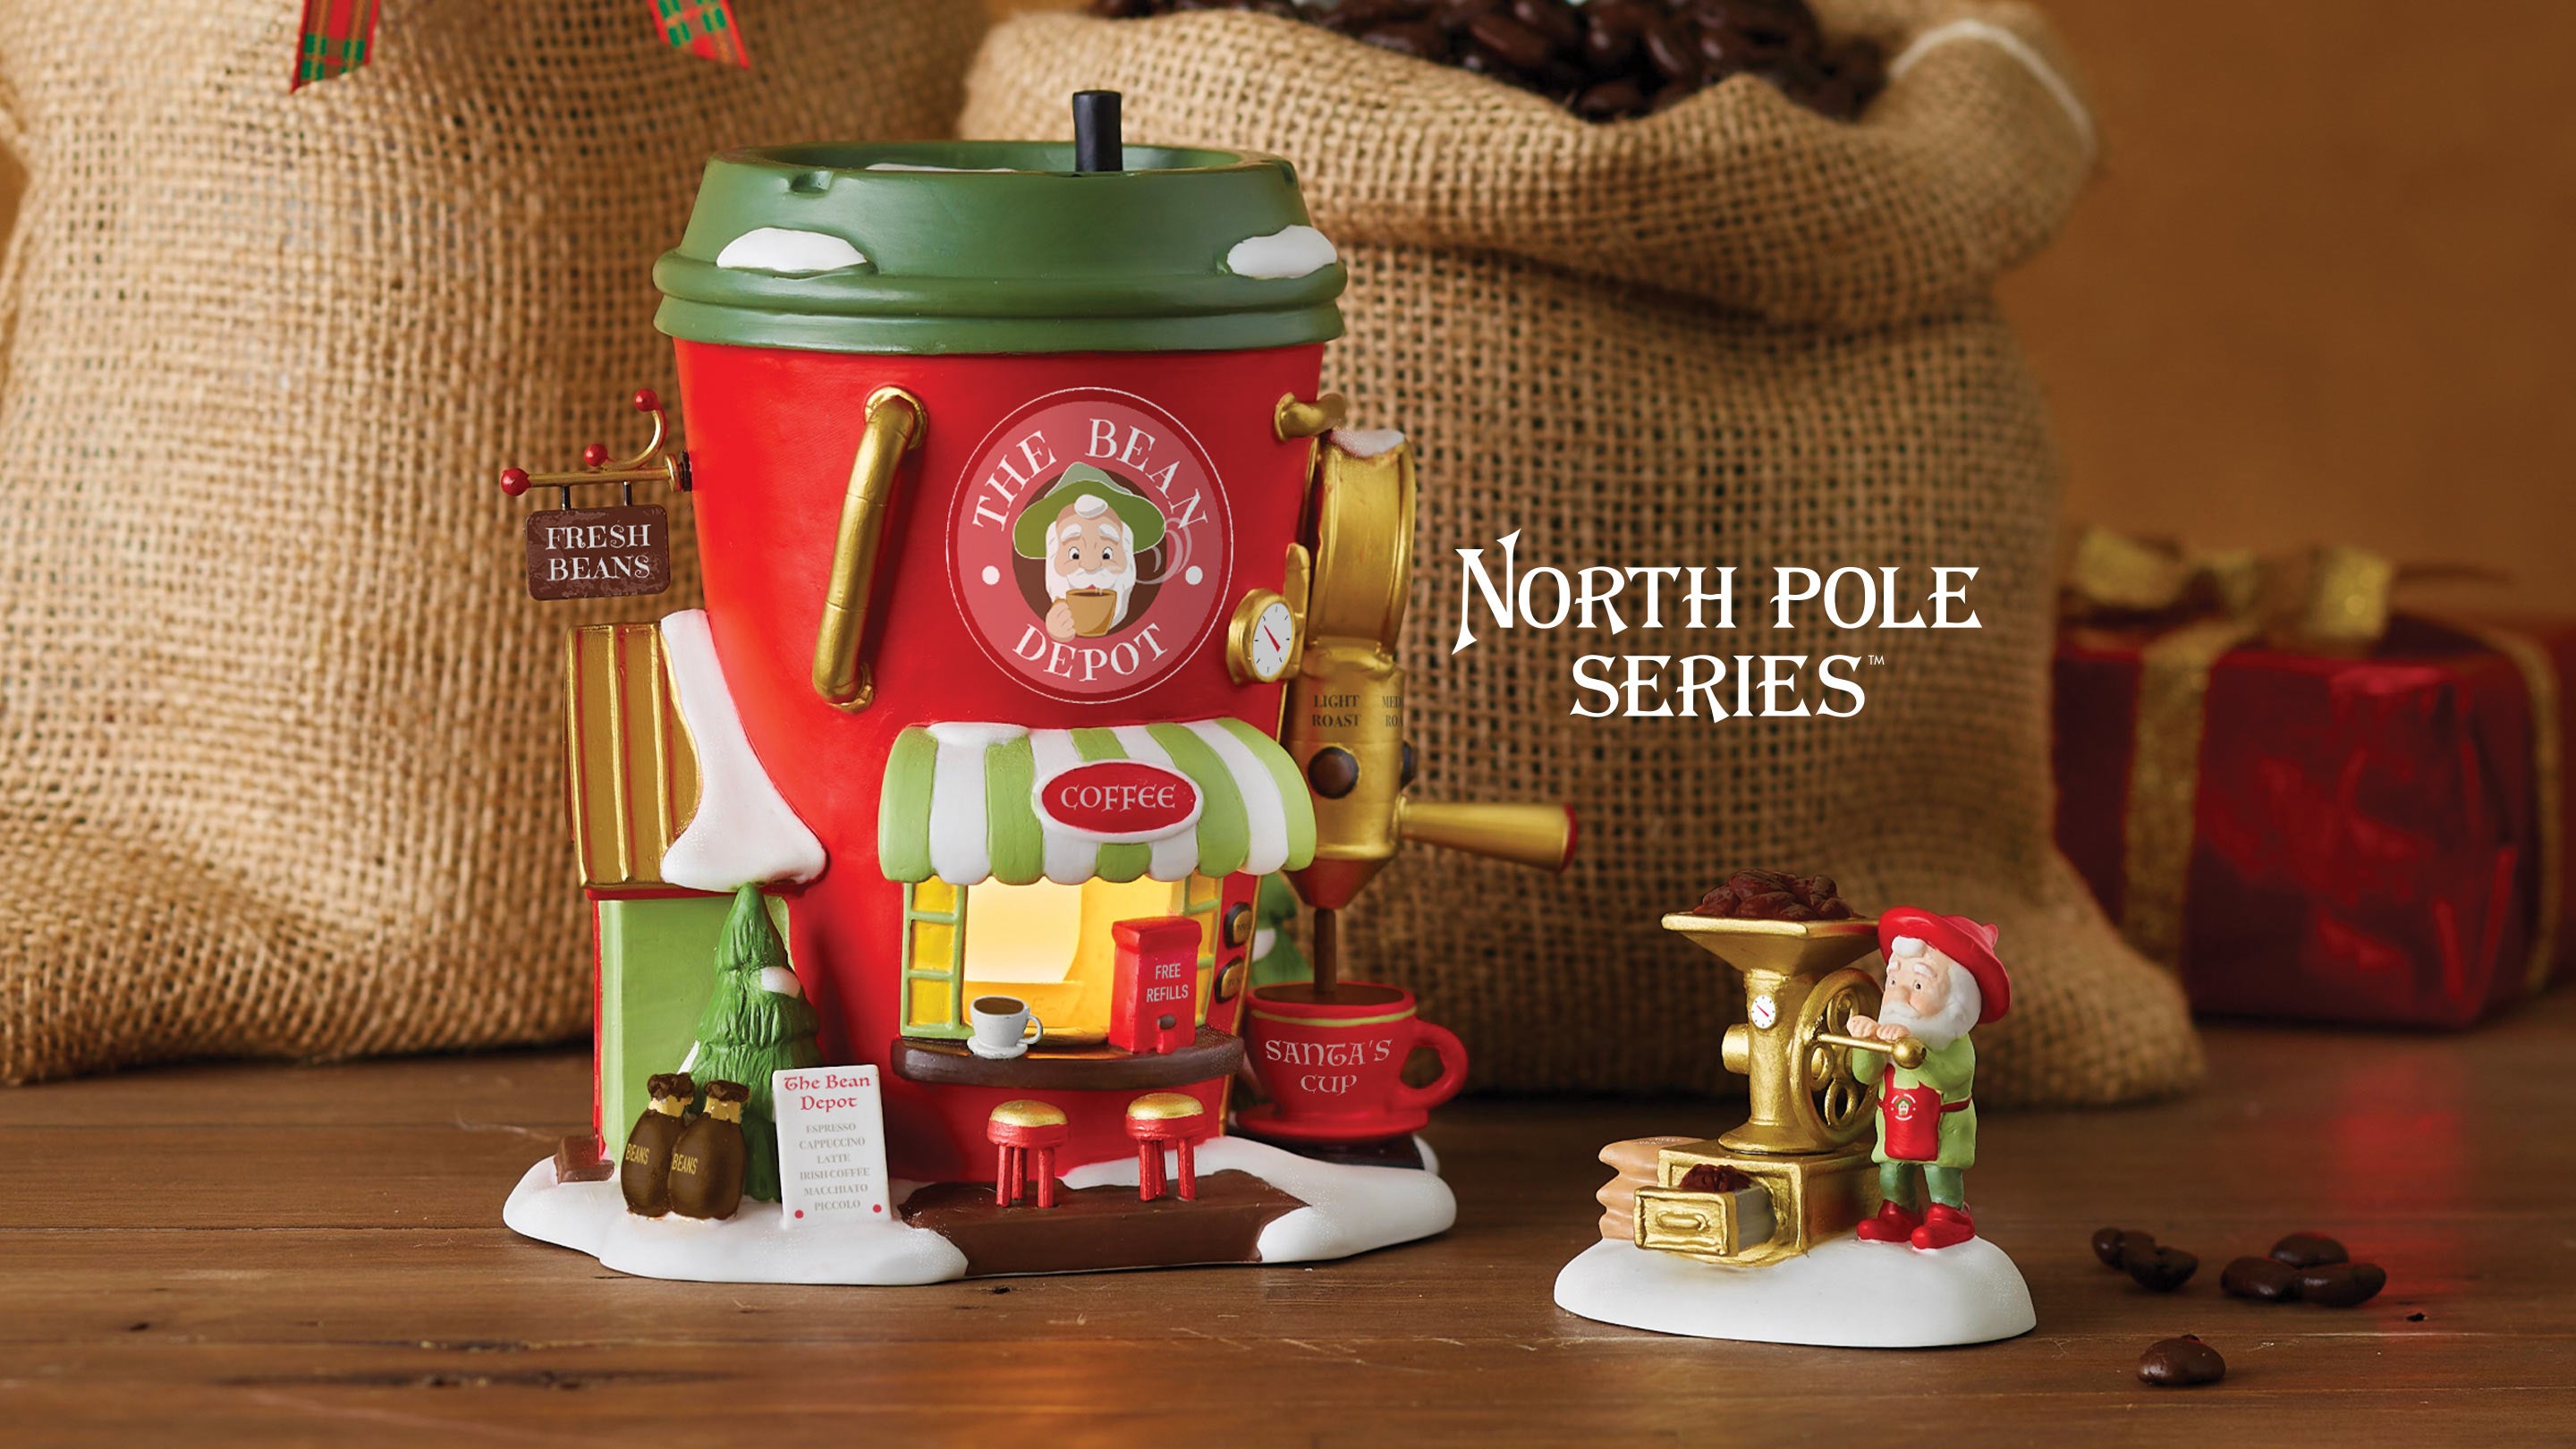 North Pole Series Collection